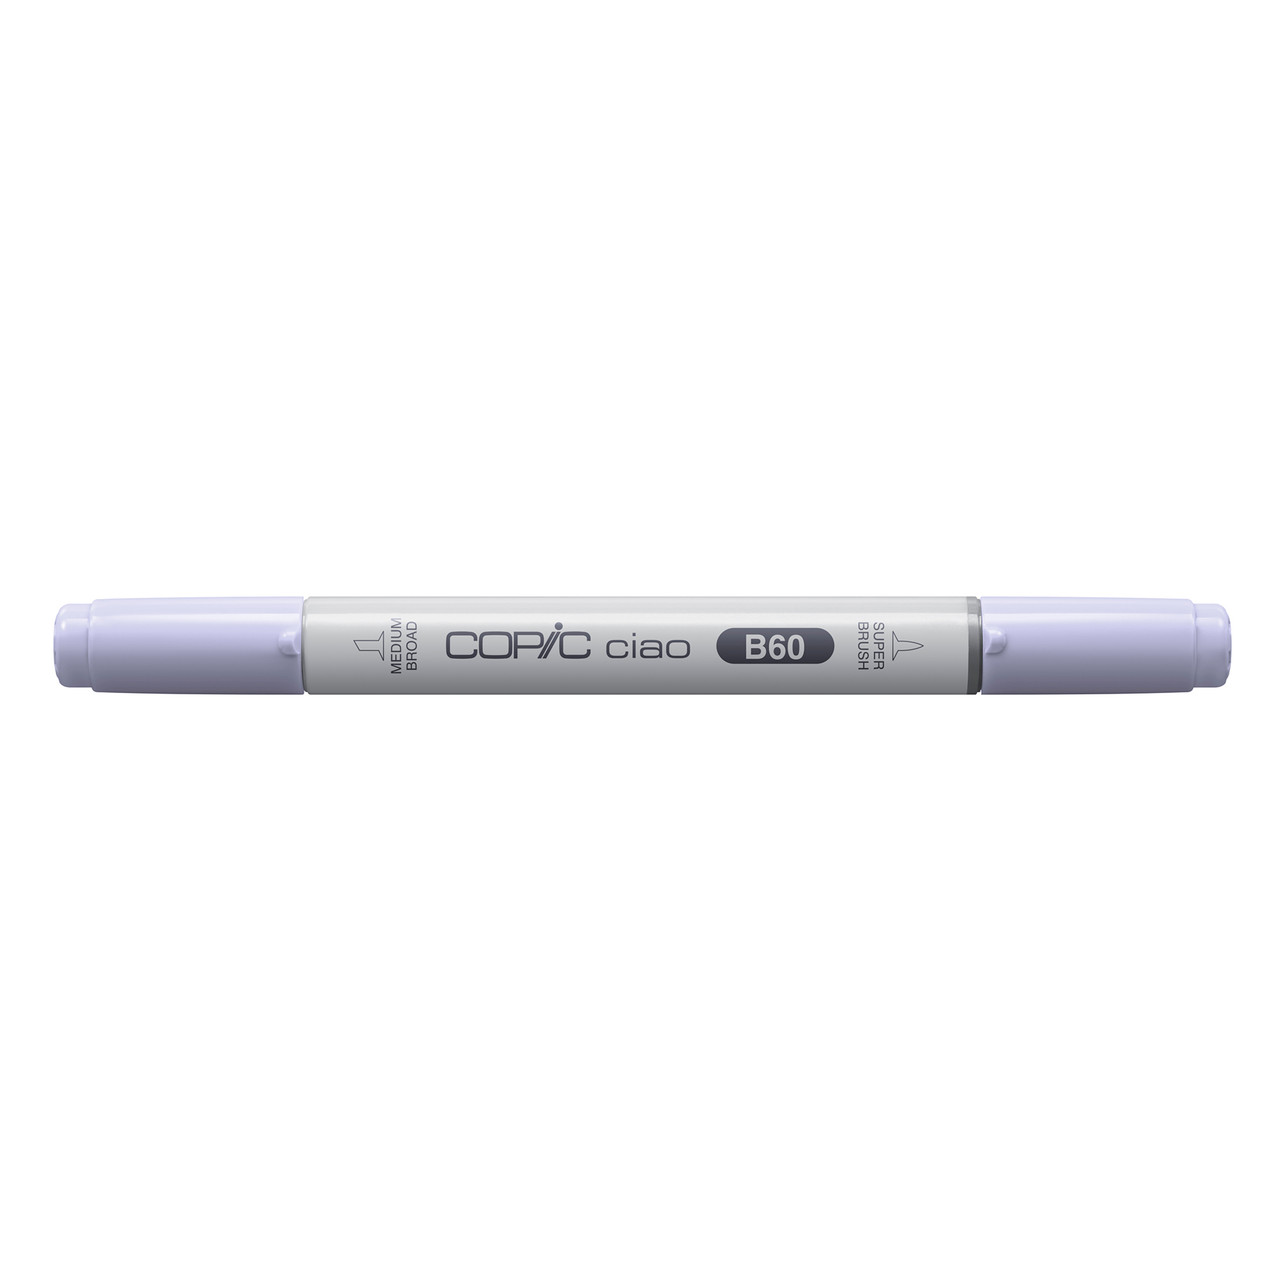 Copic Copic Ciao Marker Pale Blue Gray B60 (One Size, Pale Blue Grey B60)